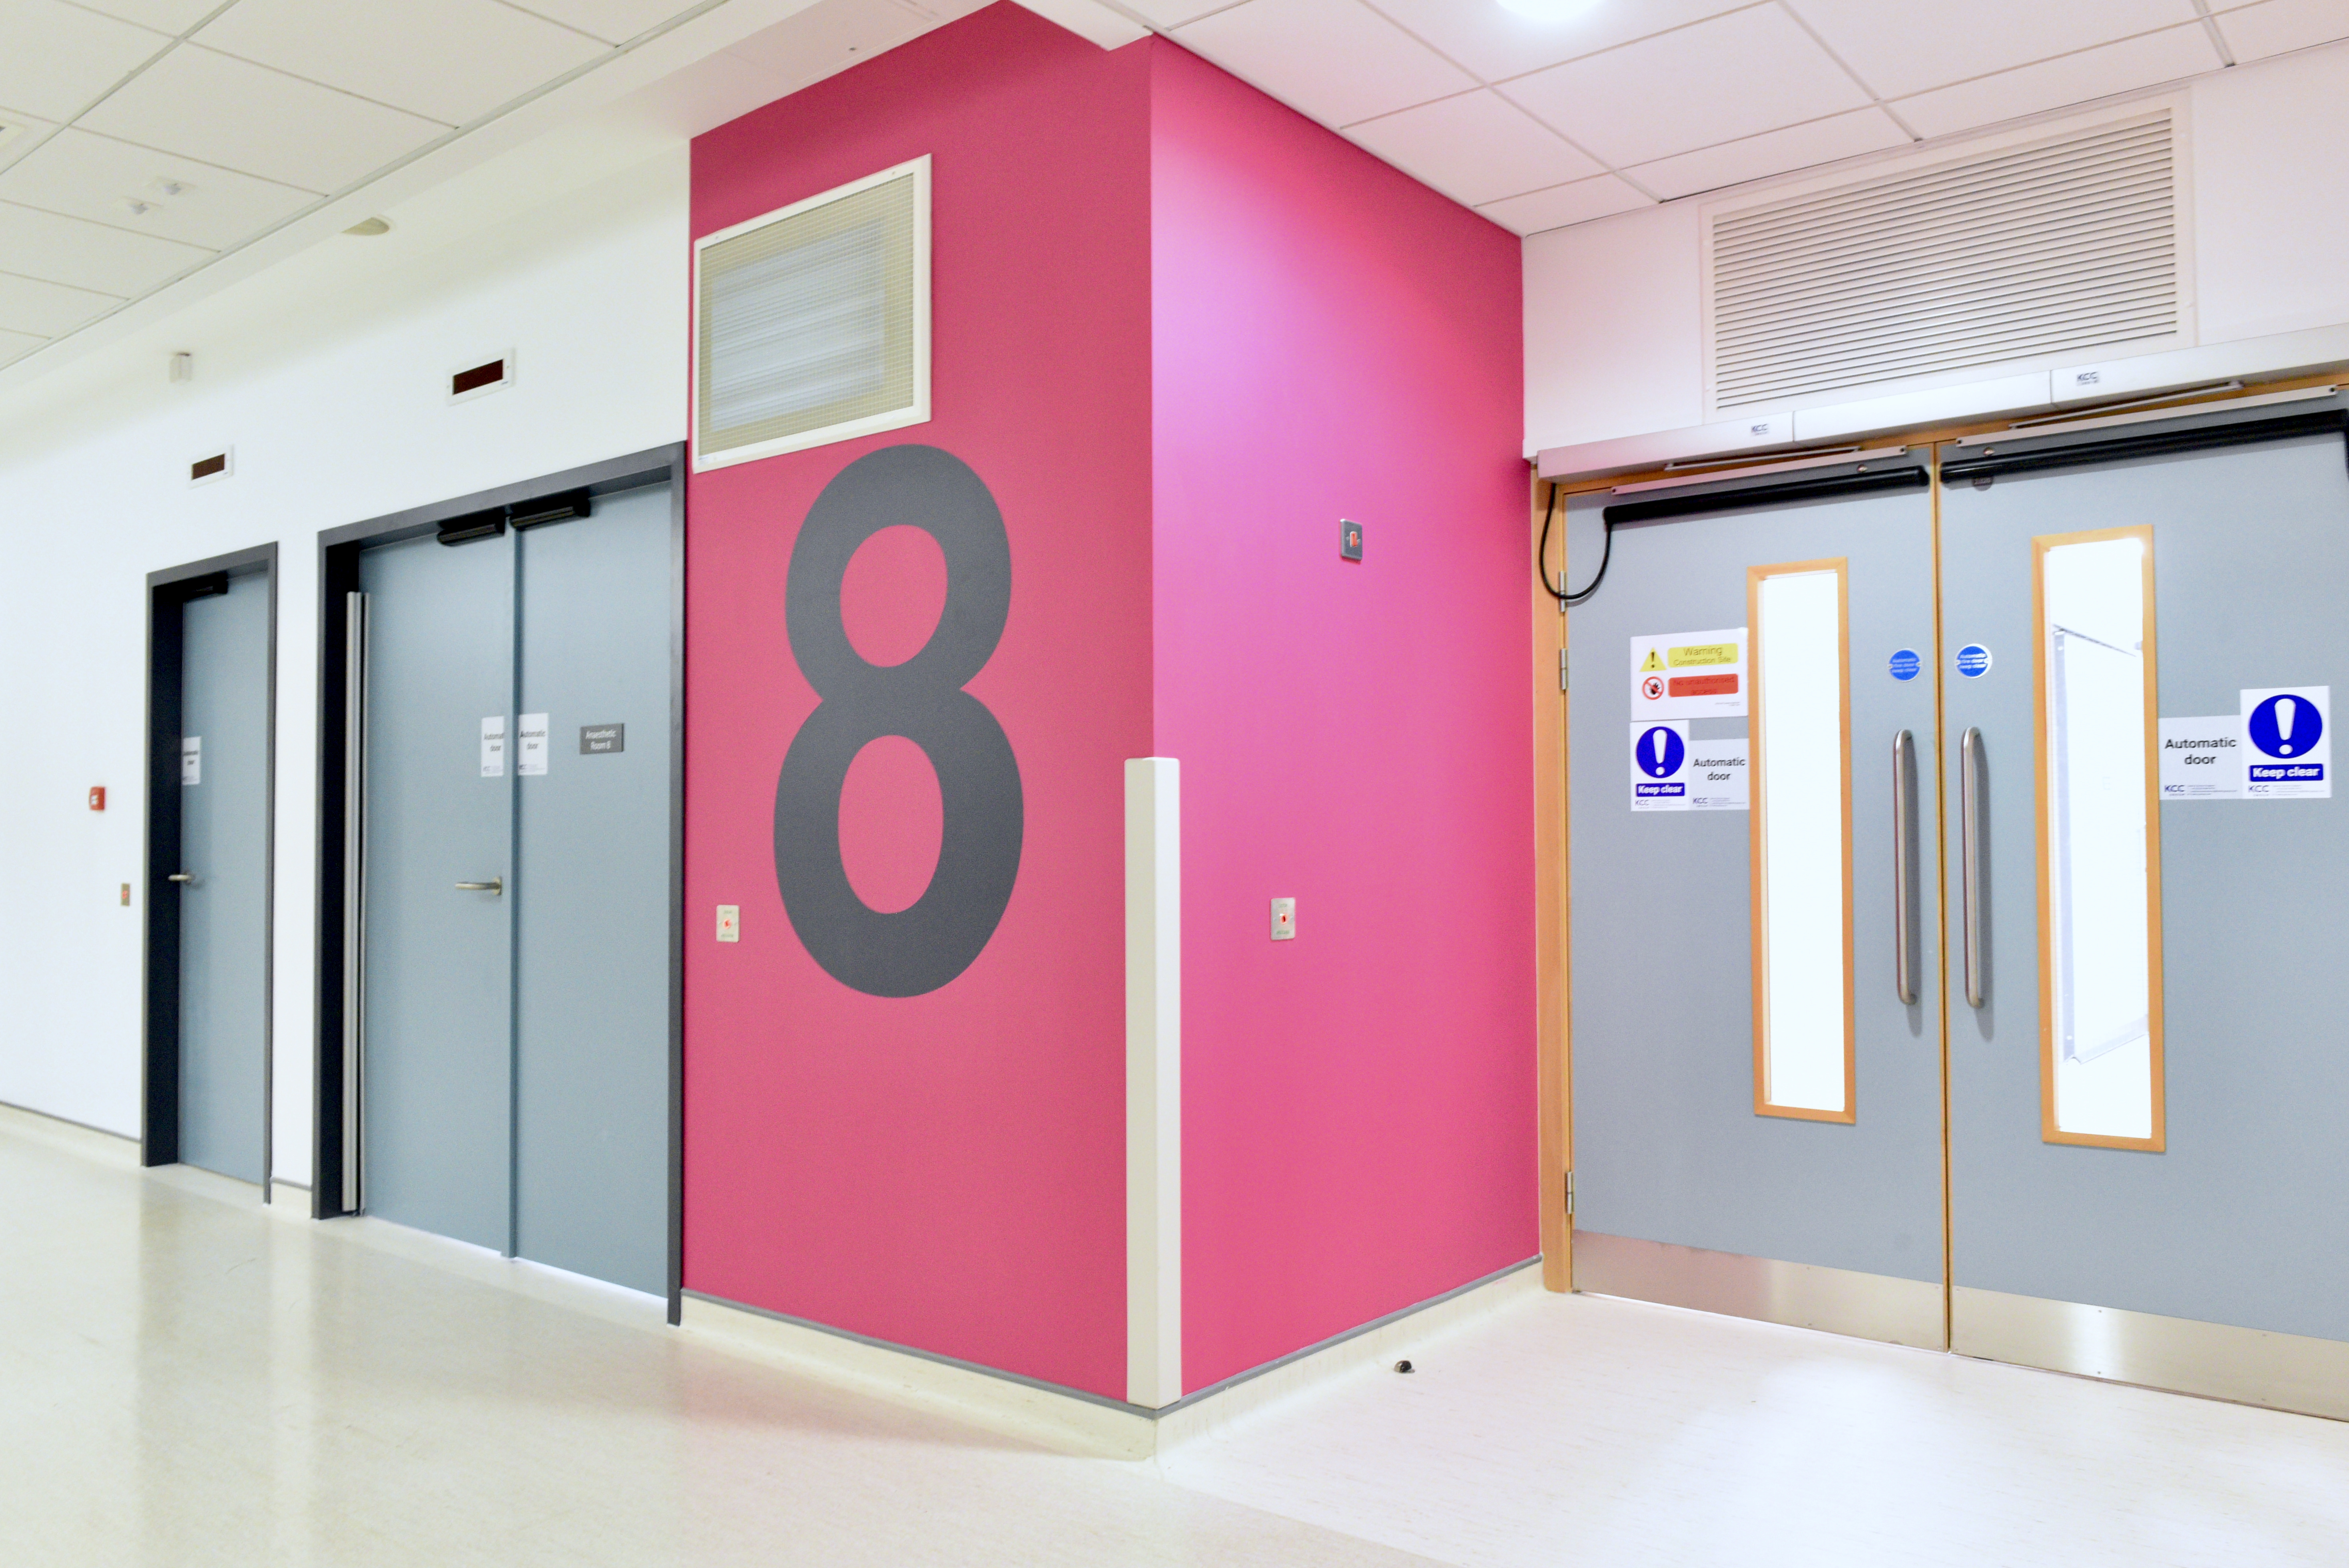 Ulster Hospital Theatre 8 successfully completed